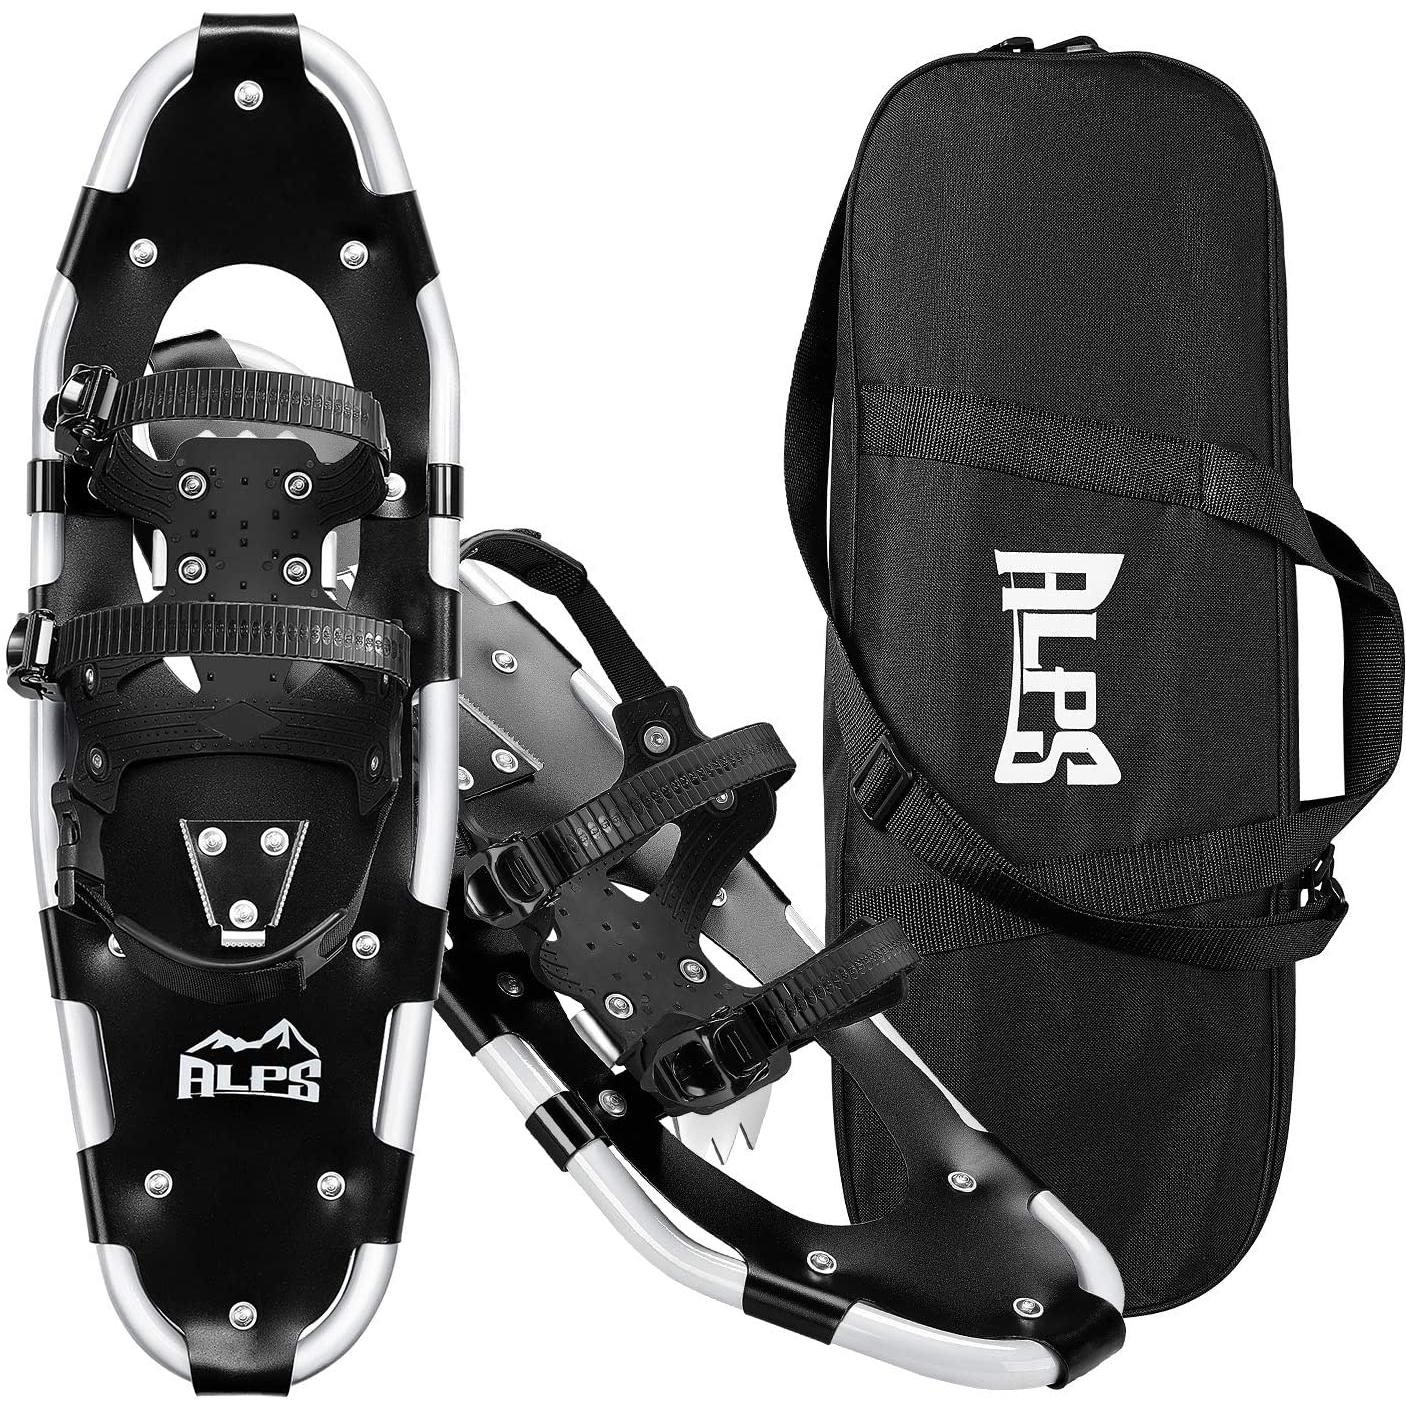 ALPS 22/25/27/30 Inches Snowshoes for Men， Women, Aluminum Snow Shoes for All Terrain with Fully Adjustable Binding and Carry Bag